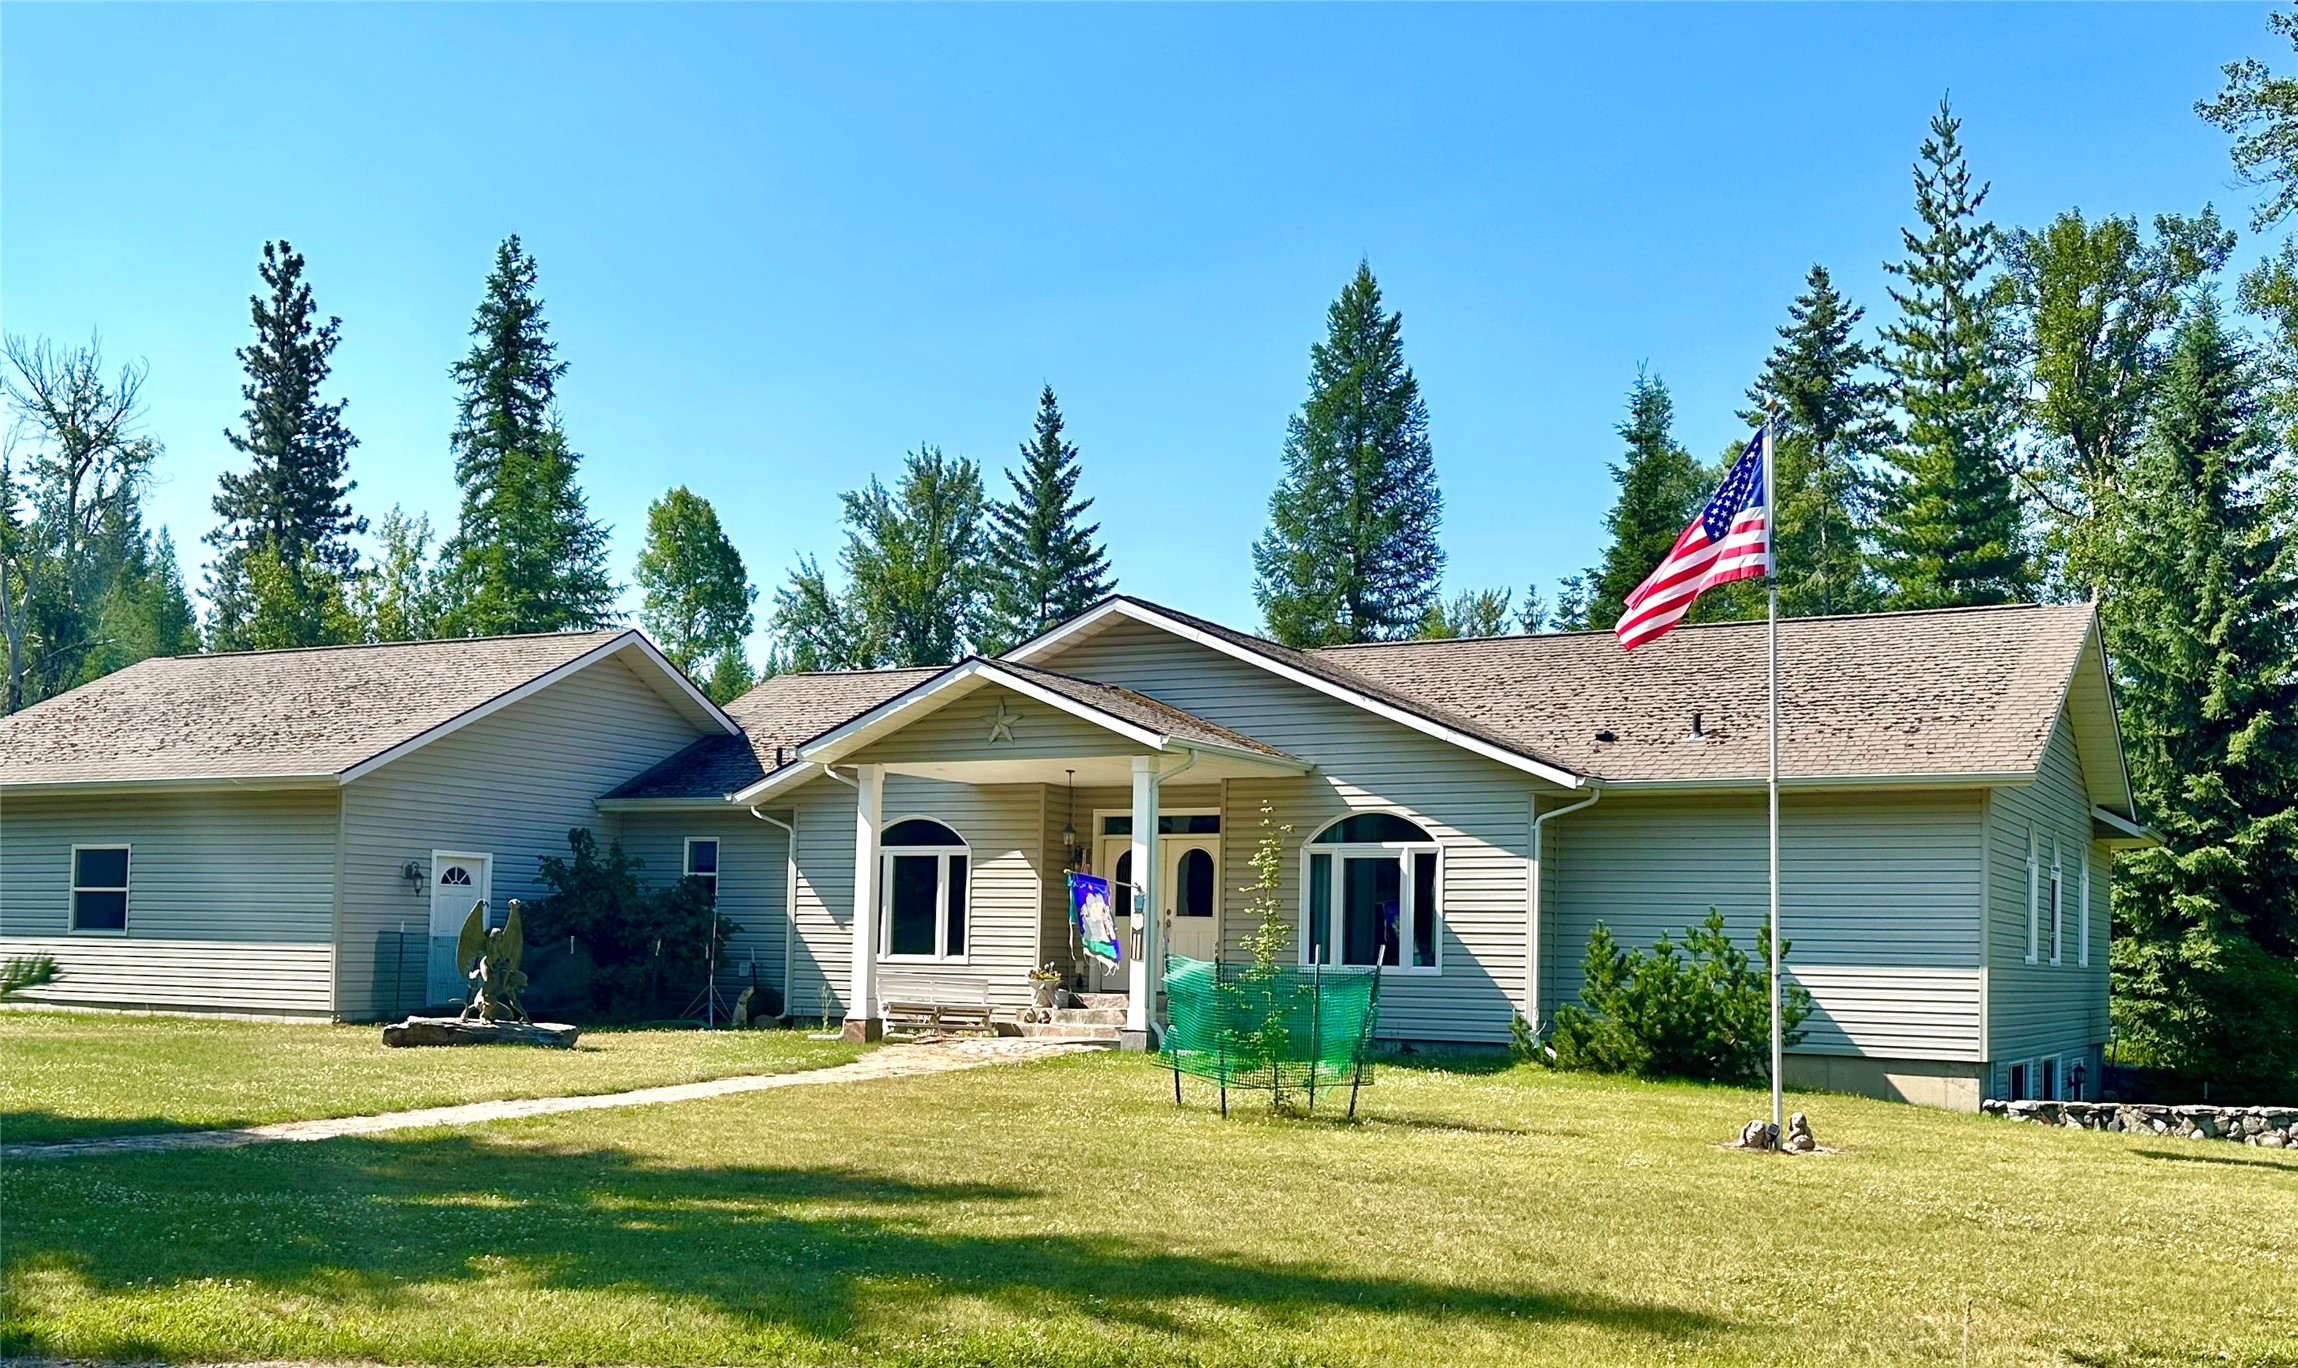 34 & 36-Childs-Road, Trout Creek Montana Real Estate Listings